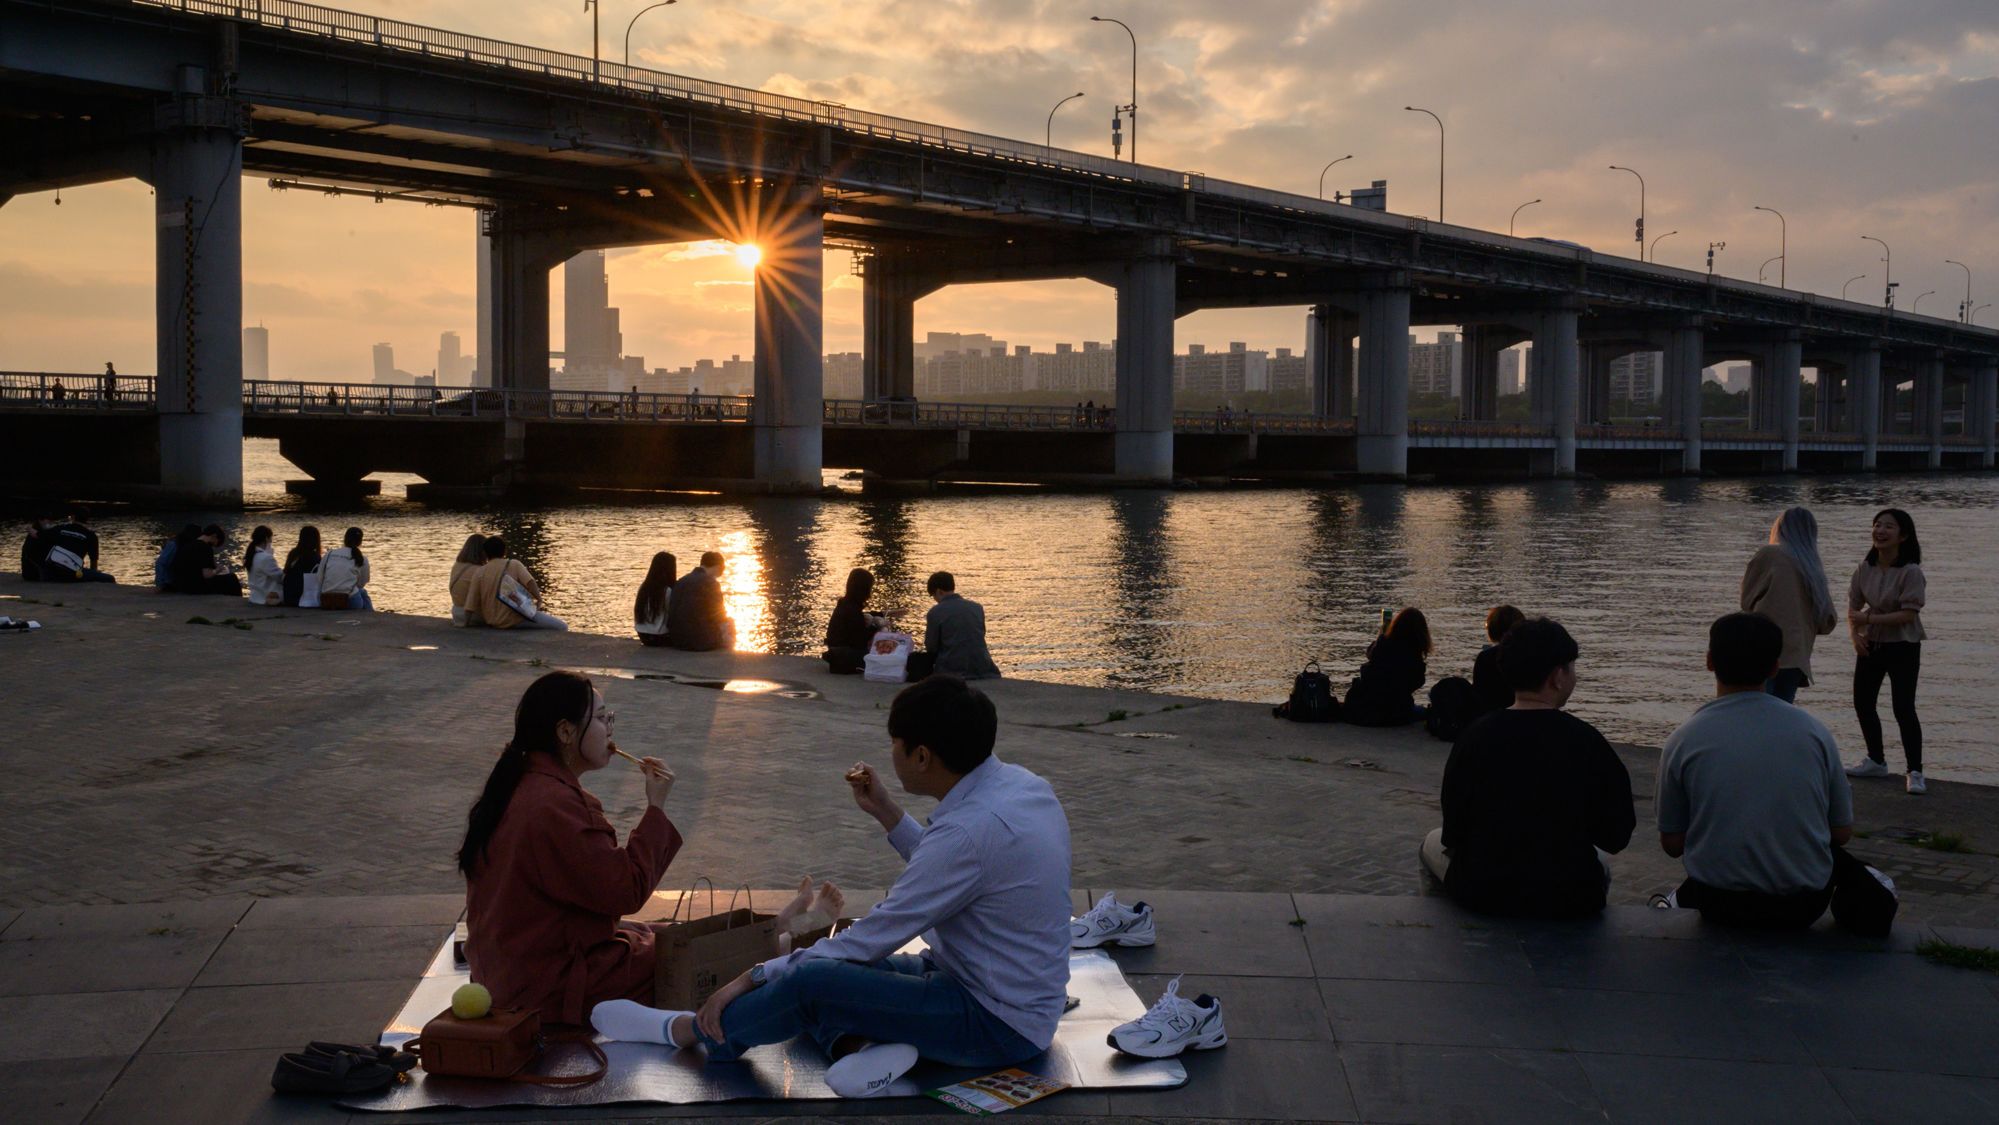 TOPSHOT - In a photo taken on May 24, 2020, people sit before the city skyline and Han river in a park in Seoul. (Photo by Ed JONES / AFP) (Photo by ED JONES/AFP via Getty Images)